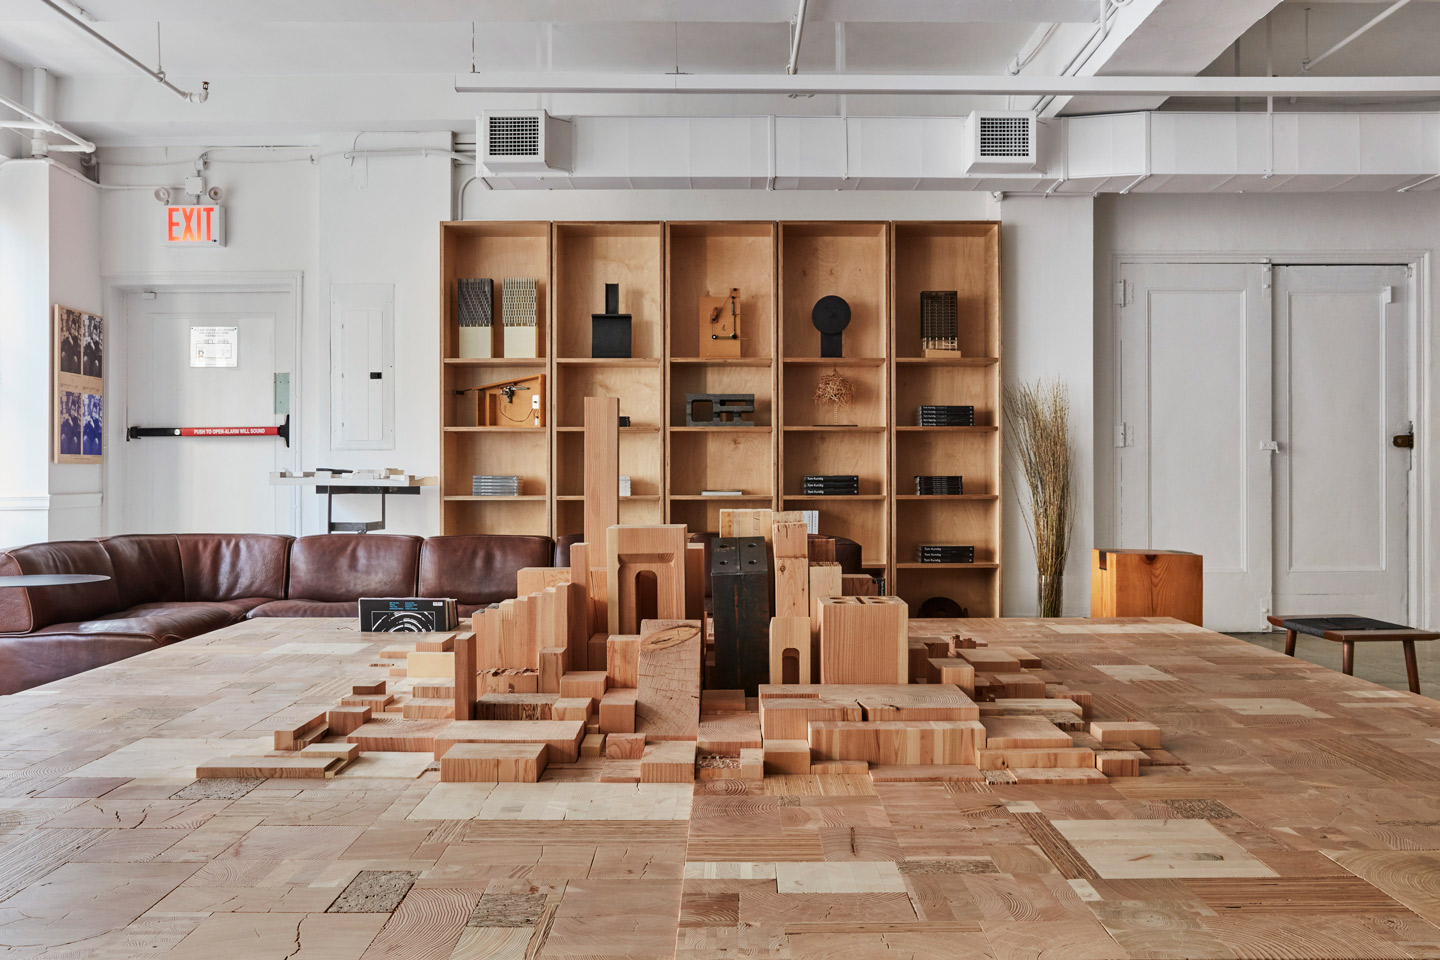 Olson Kundig architecture office in New York City